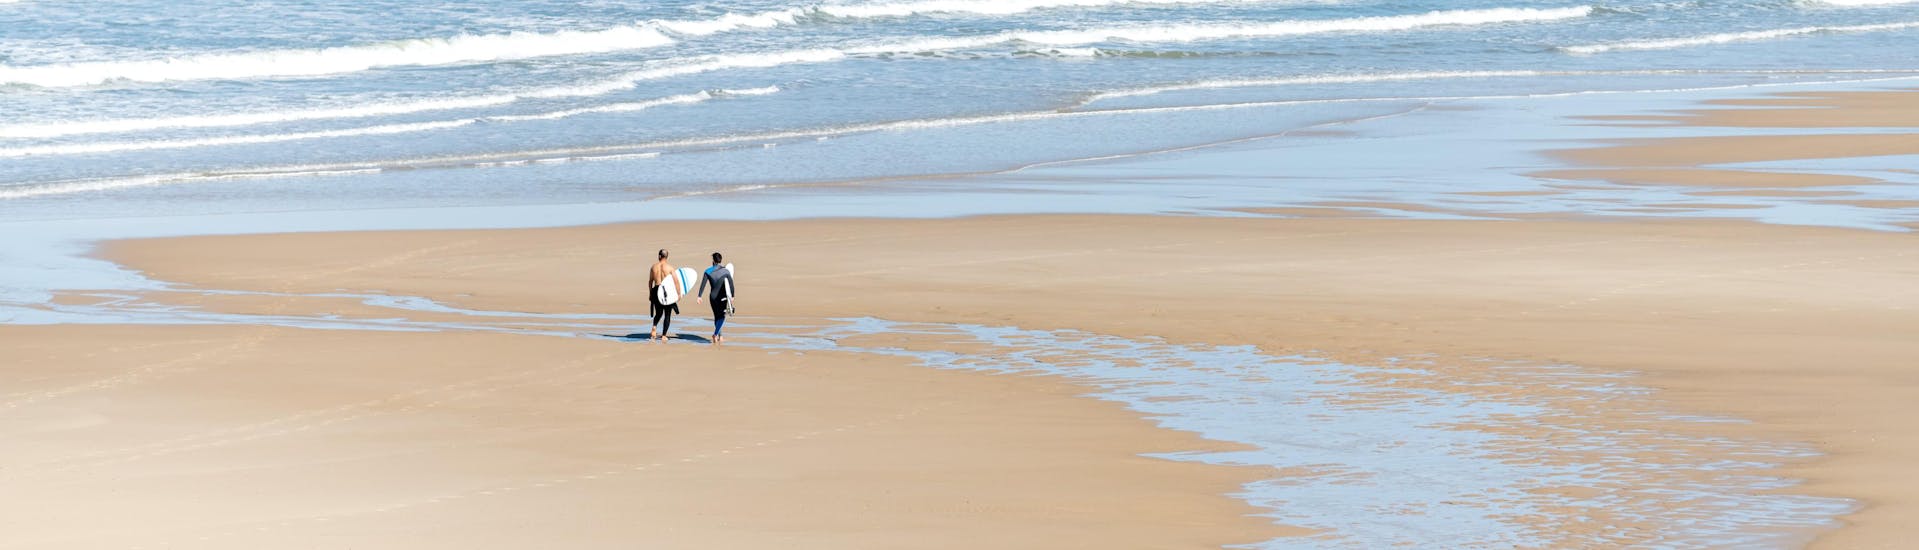 Two men are walking on the beach of Capbreton with their surfboard under their arm, where many surfing lessons take place.